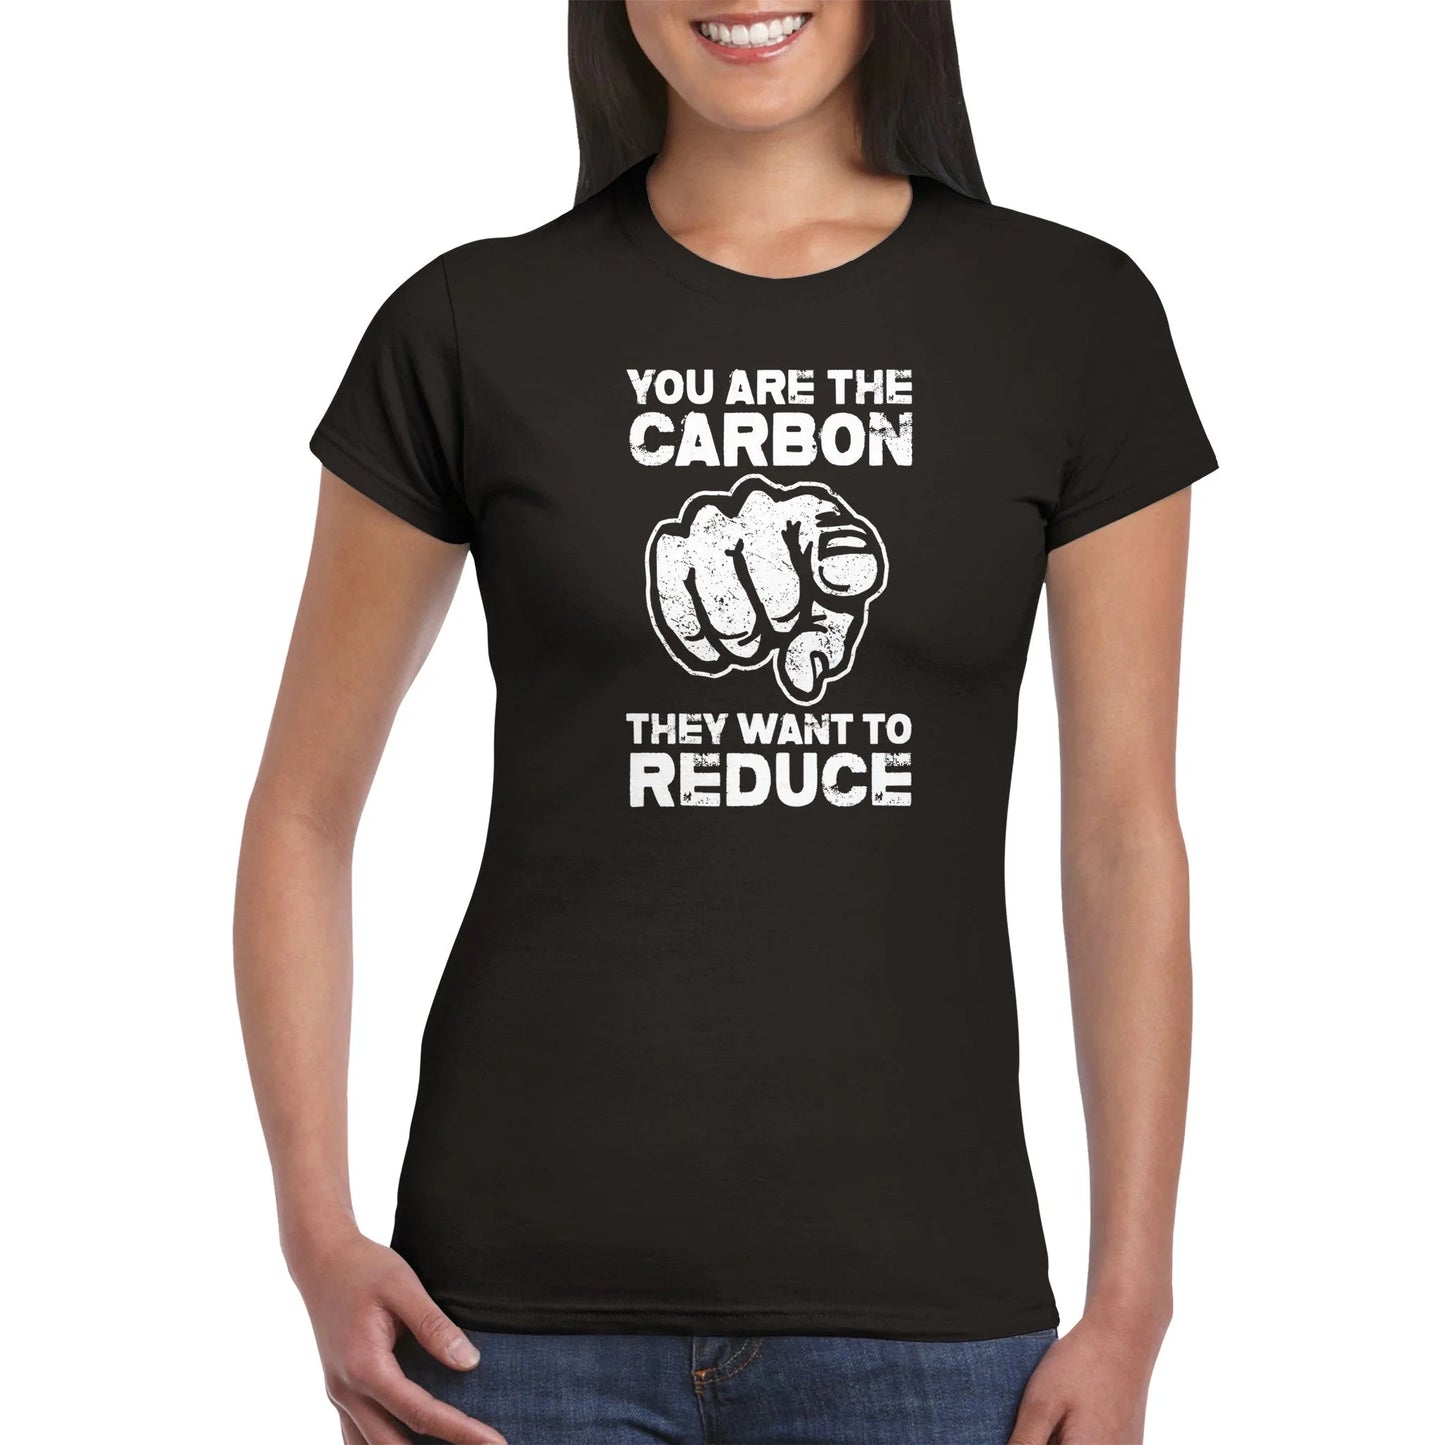 "You Are The Carbon They Want To Reduce" Women's T-Shirt